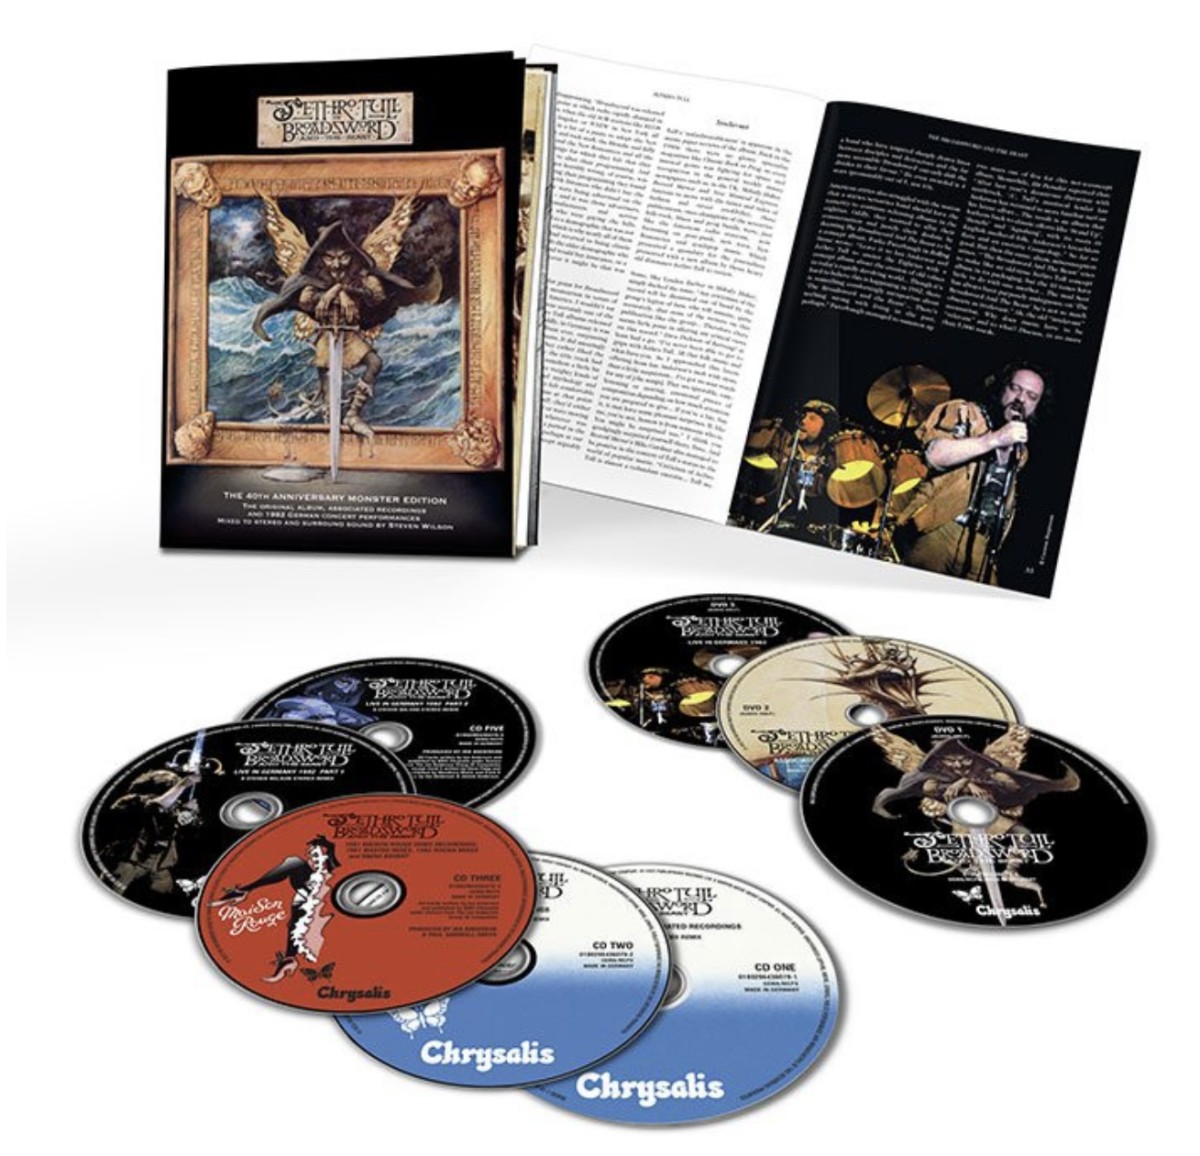 Jethro Tull’s The Broadsword And The Beast The 40th Anniversary Monster Edition Is A Monster Of A Musical Experience